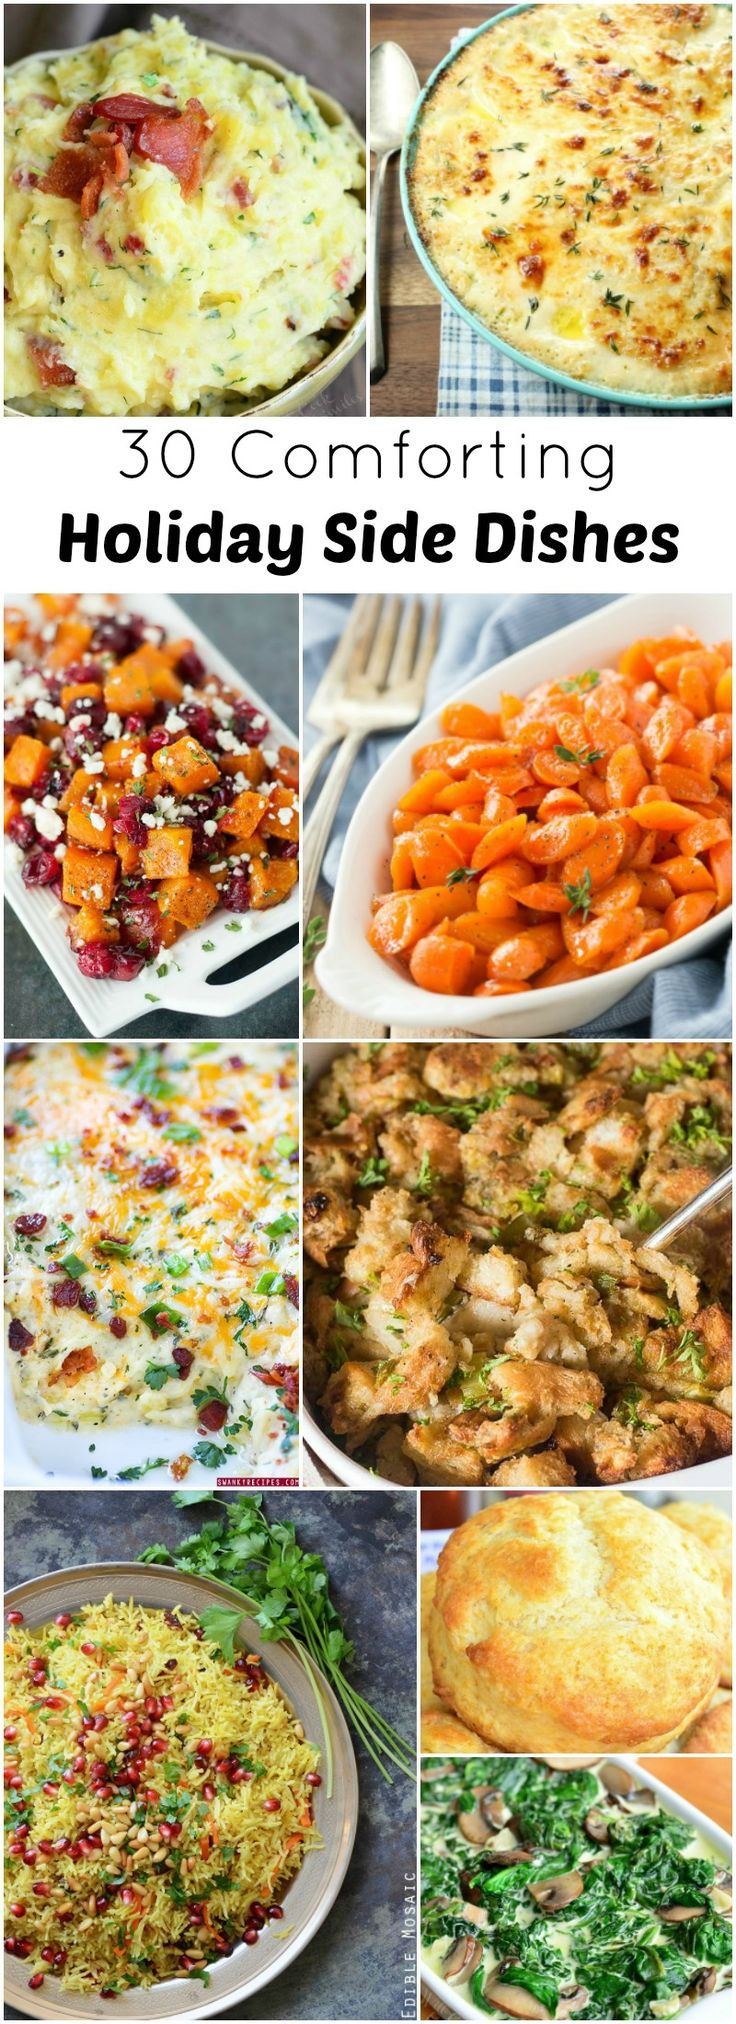 Christmas Side Dishes Recipes
 Best 20 Holiday Side Dishes ideas on Pinterest